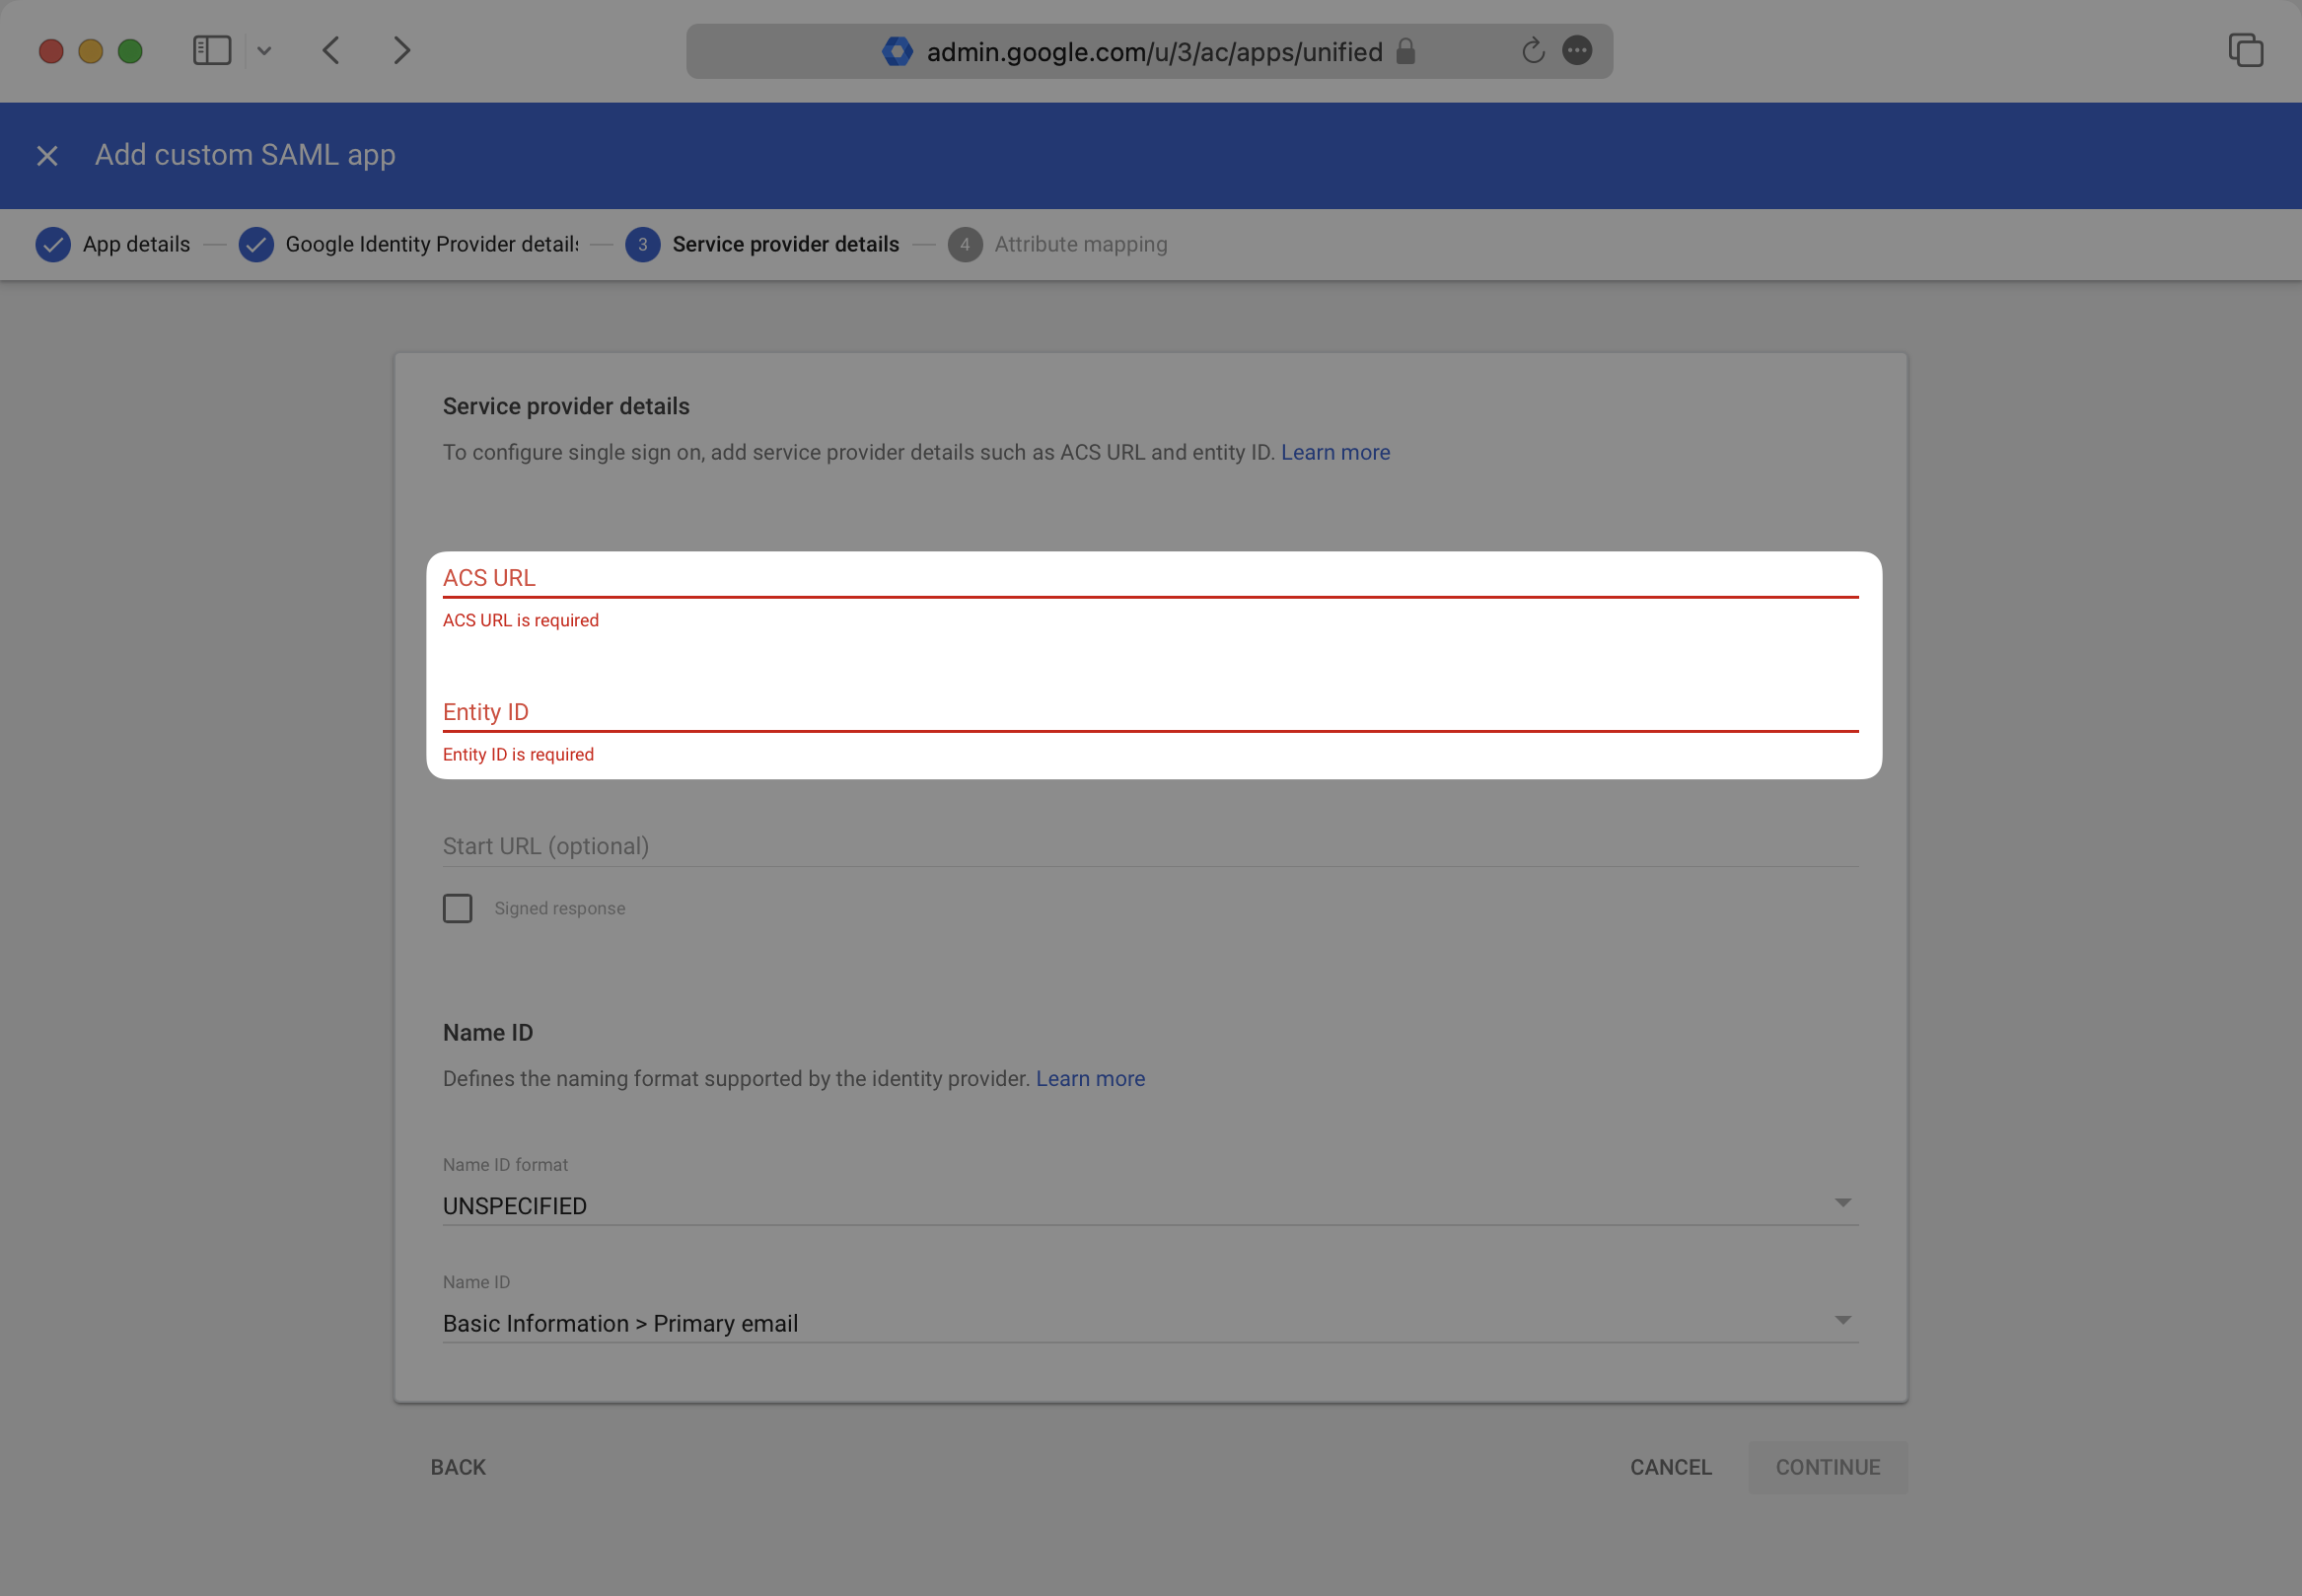 A screenshot showing where to enter "Entity ID" and "ACS URL" in the Google Dashboard.